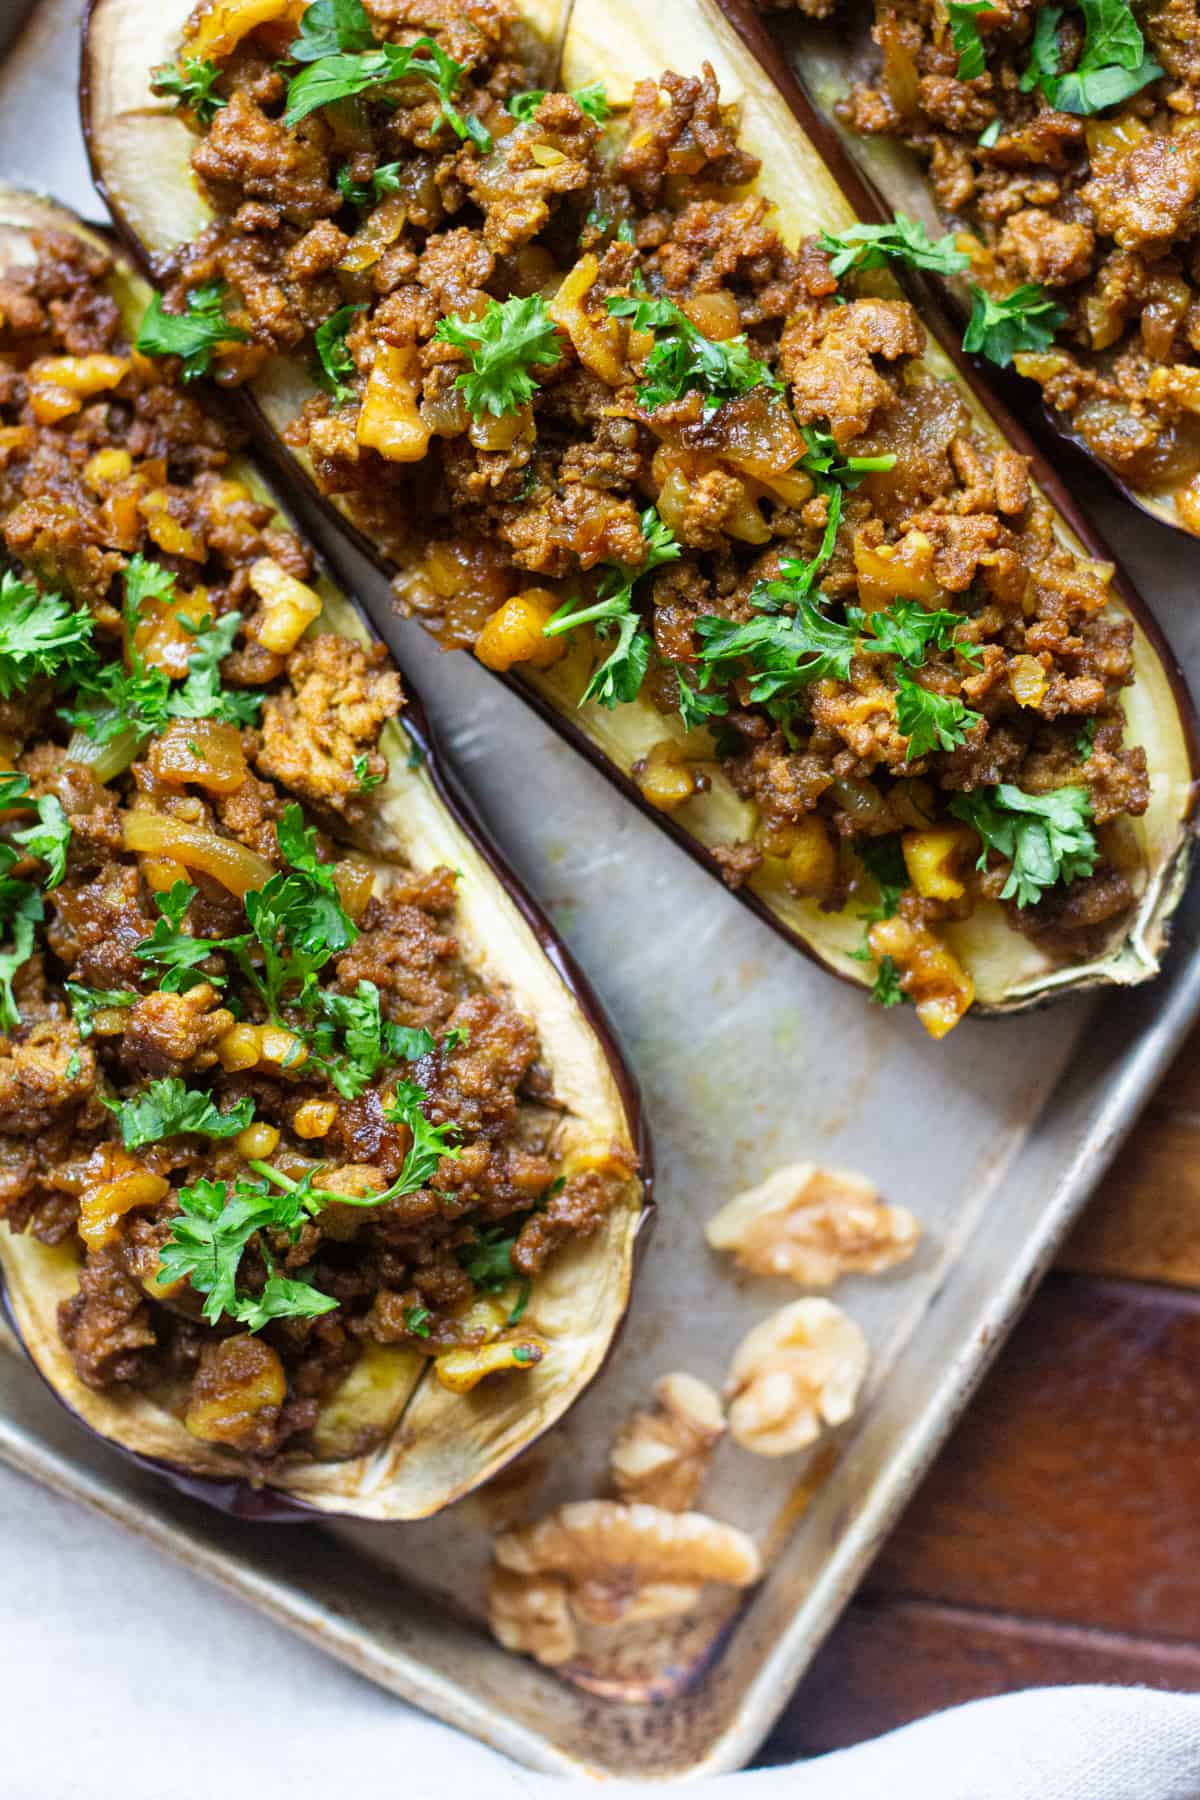 Stuffed Eggplant with Walnuts and Lamb is a family favorite. Juicy eggplants are roasted to perfection, topped with spicy lamb and crunchy walnuts. It's the perfect combination of flavors!